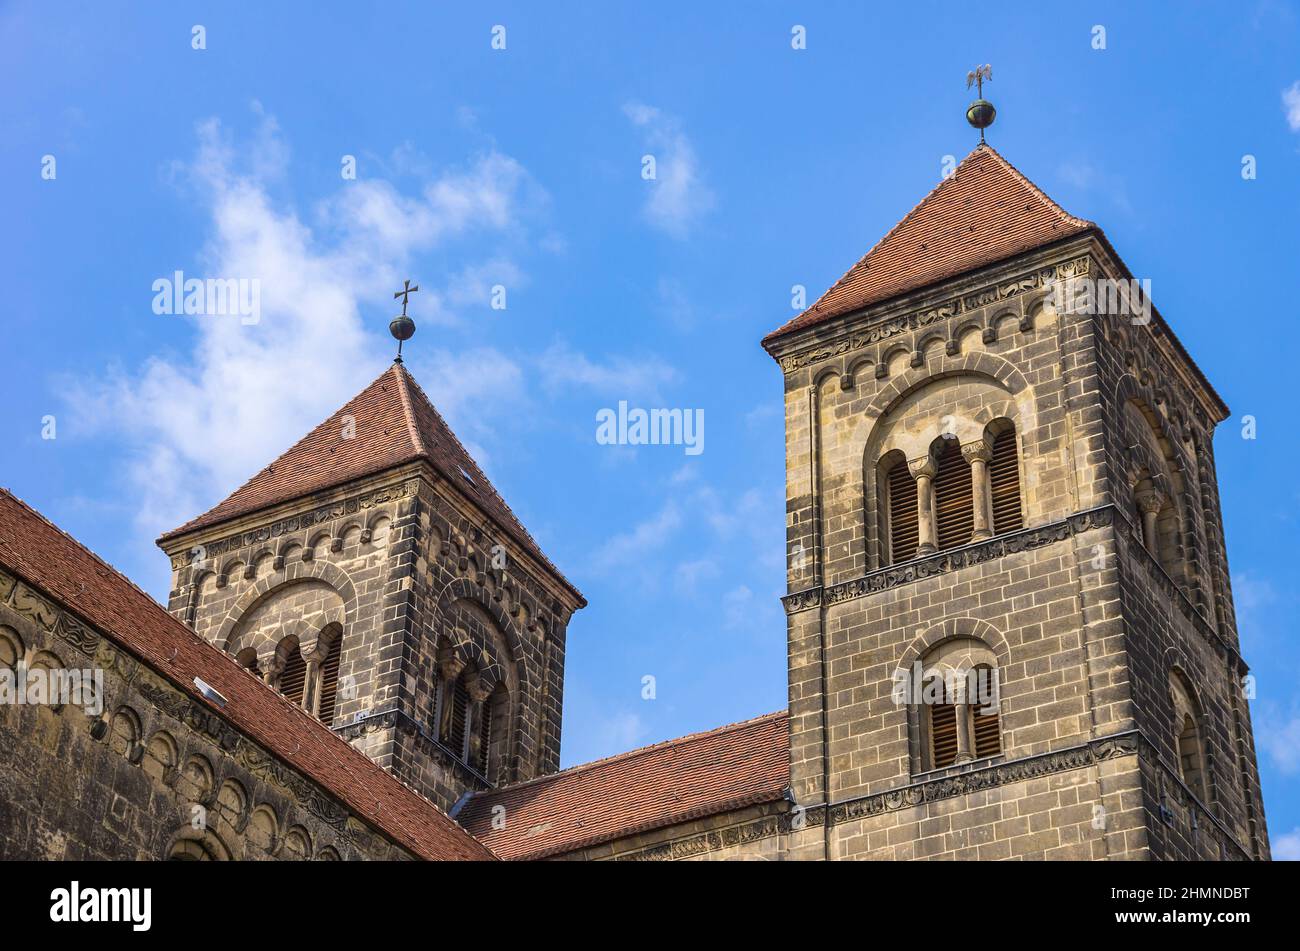 The steeples of the Collegiate Church of St. Servatius, Quedlinburg, Saxony-Anhalt, Germany. Stock Photo